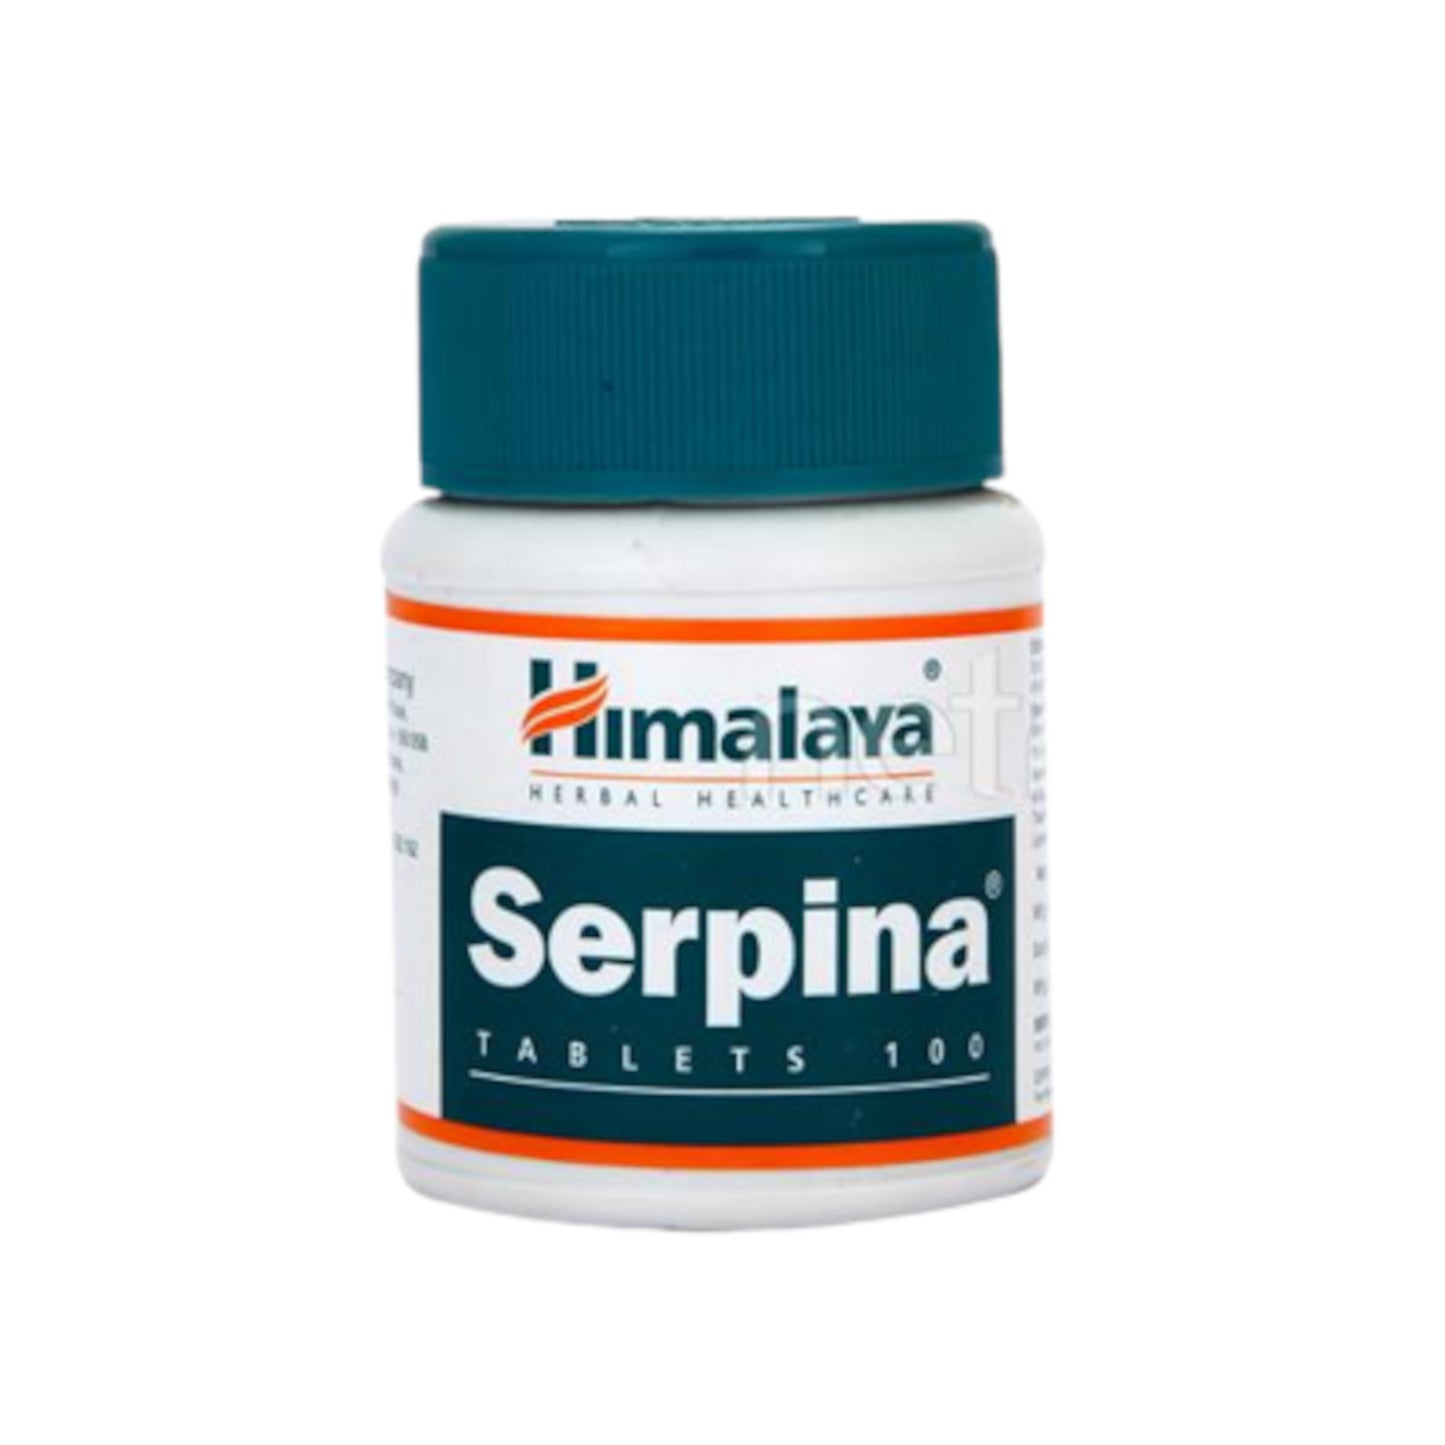 Image: Himalaya Serpina 100 Tablets - Antihypertensive for blood pressure and anxiety management.